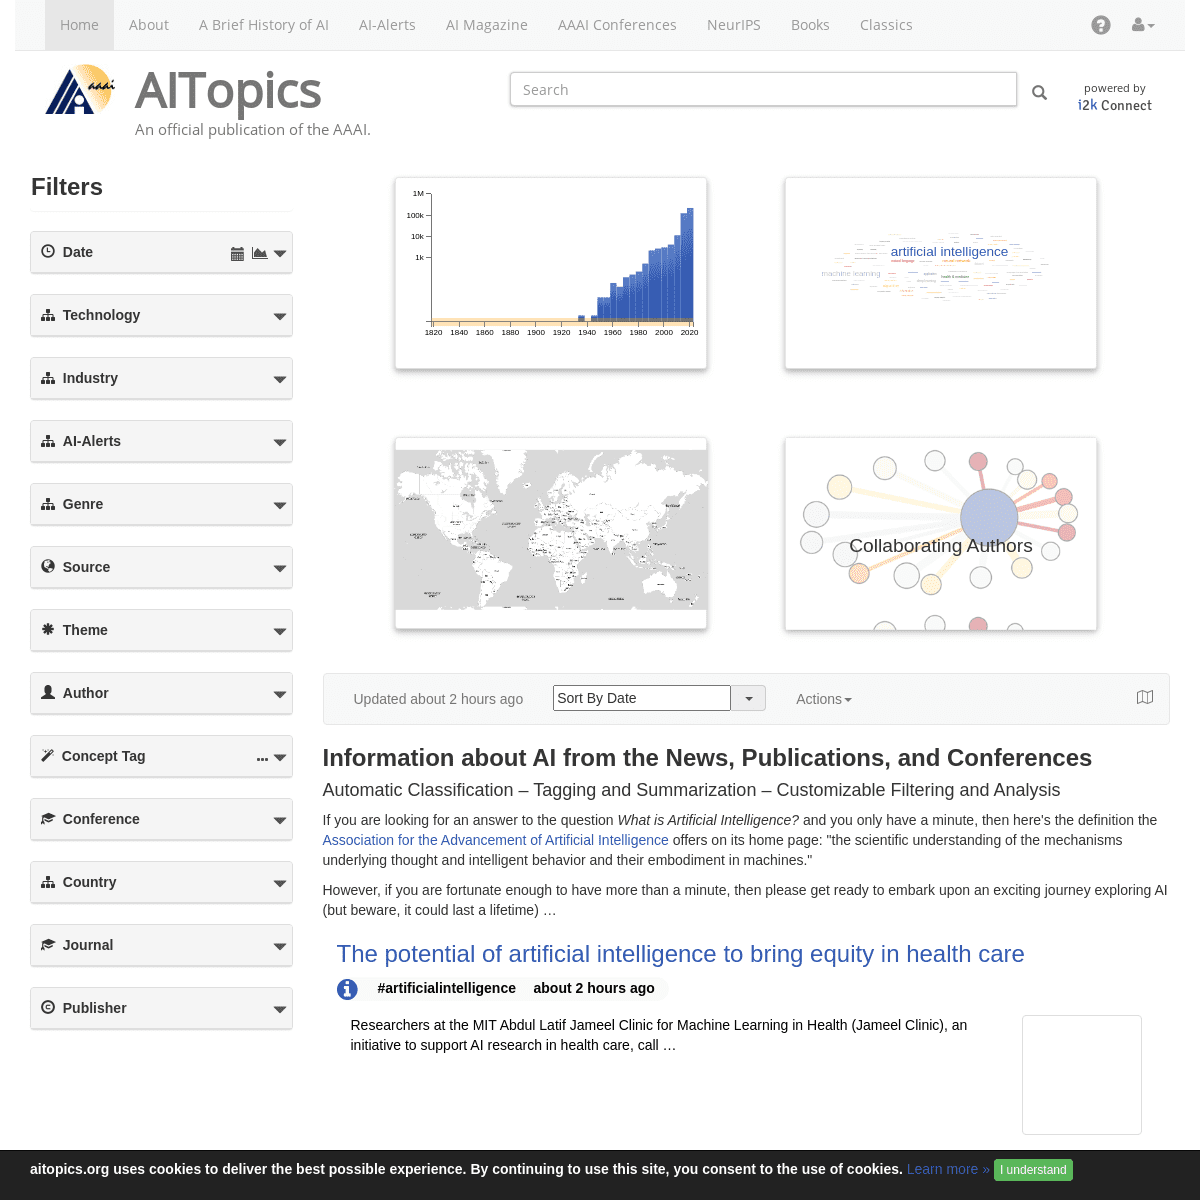 A complete backup of https://aitopics.org